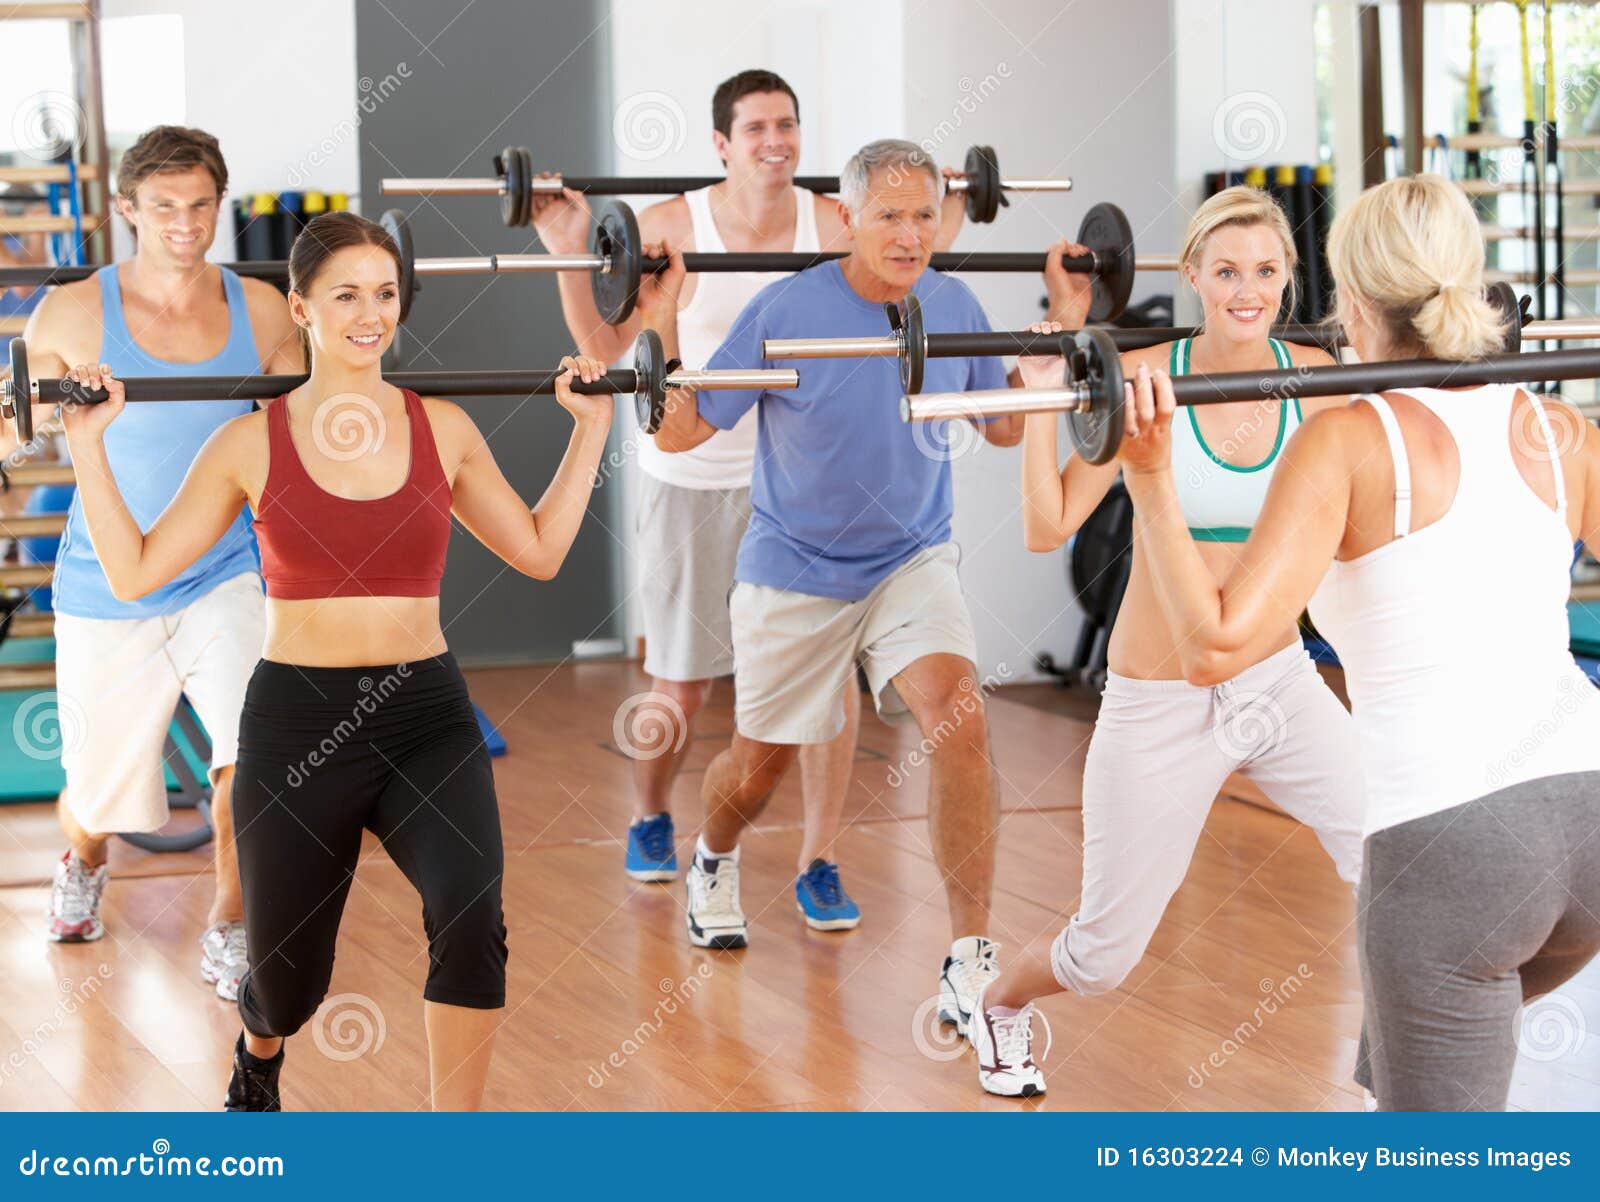 group of people lifting weights